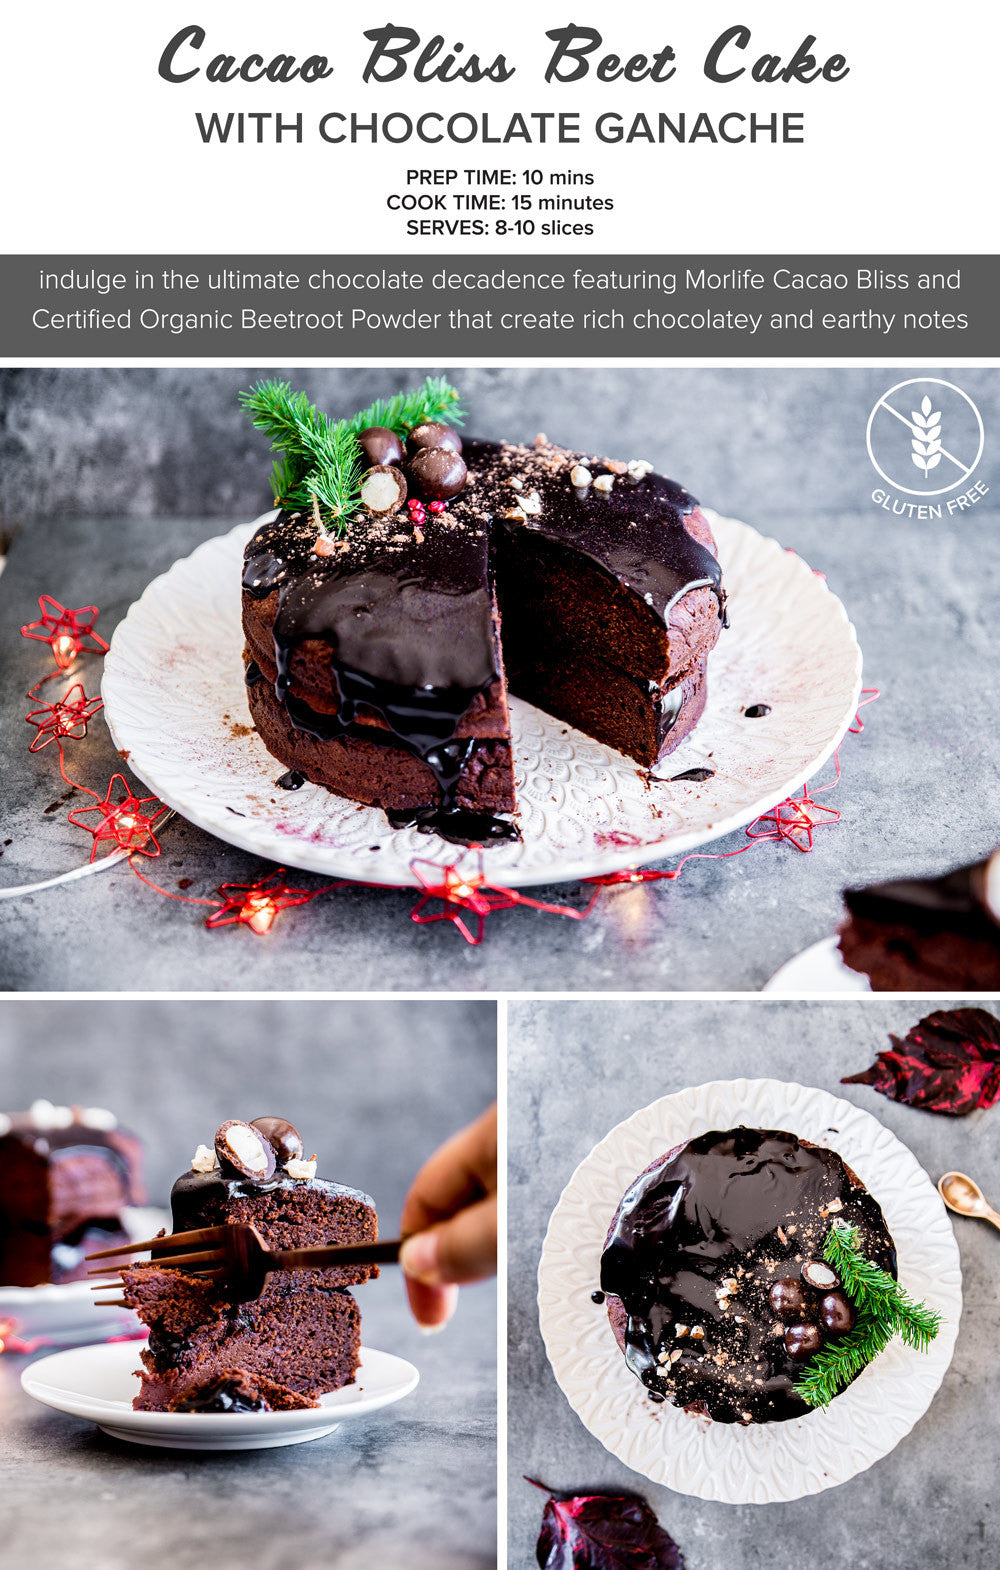 Cacao bliss beet cake